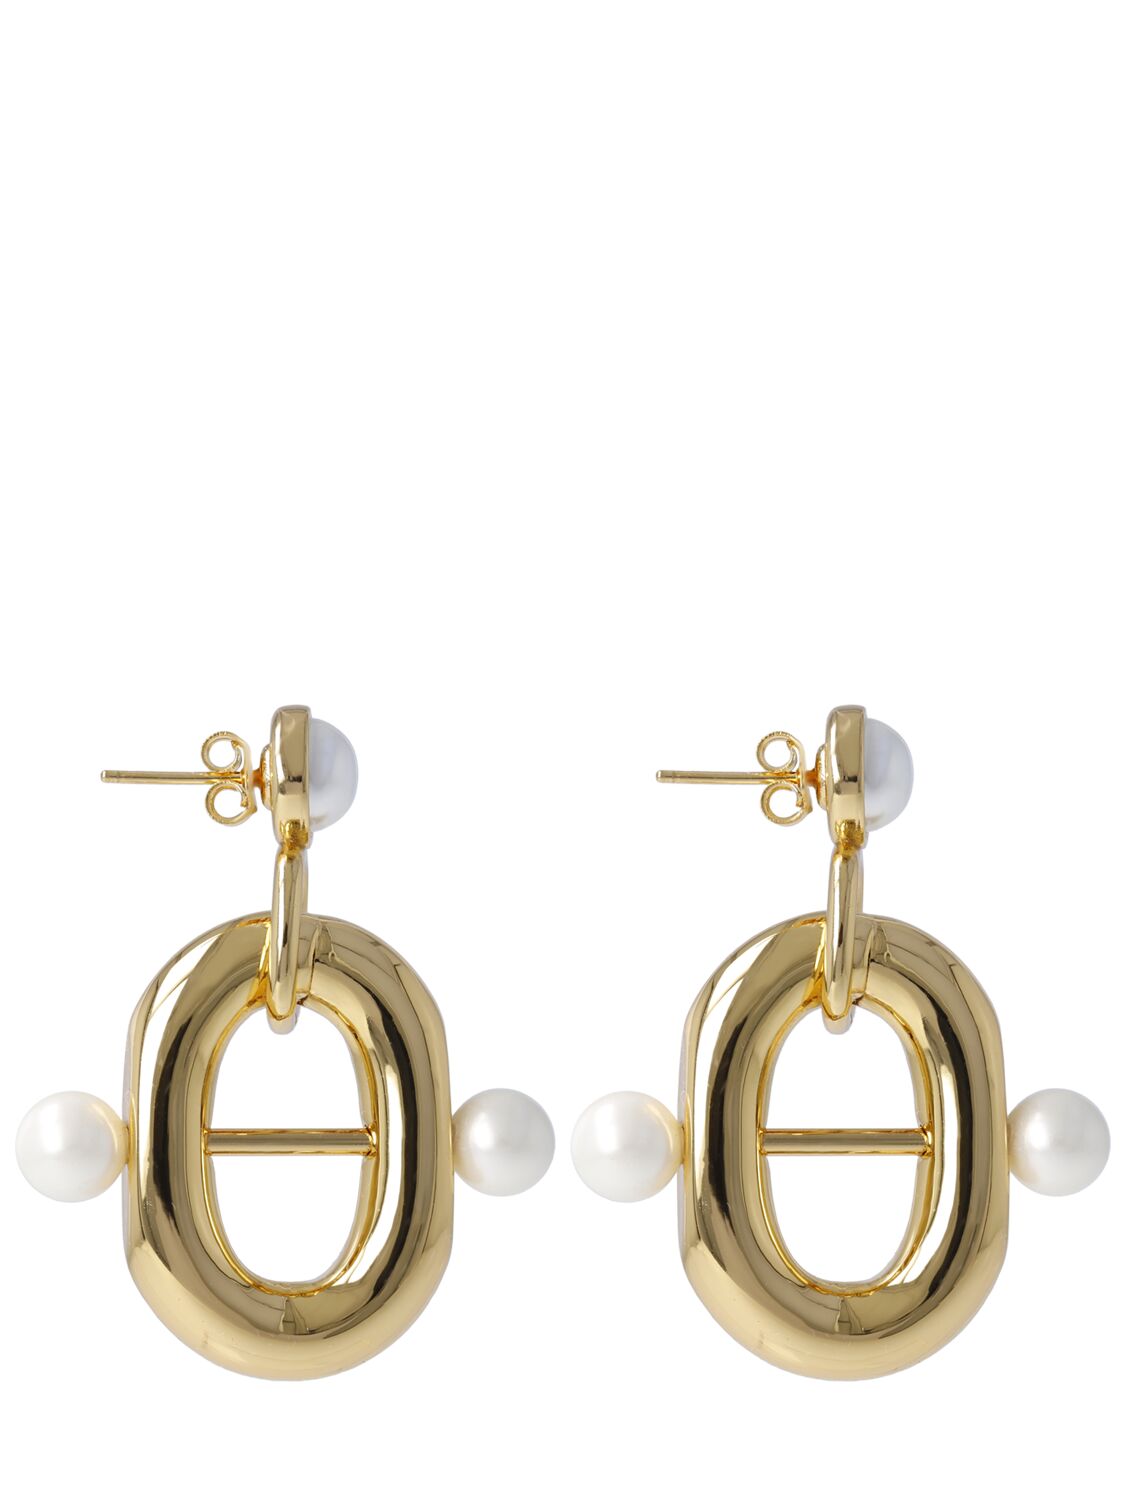 Image of Xl Link Double Earrings With Faux Pearls